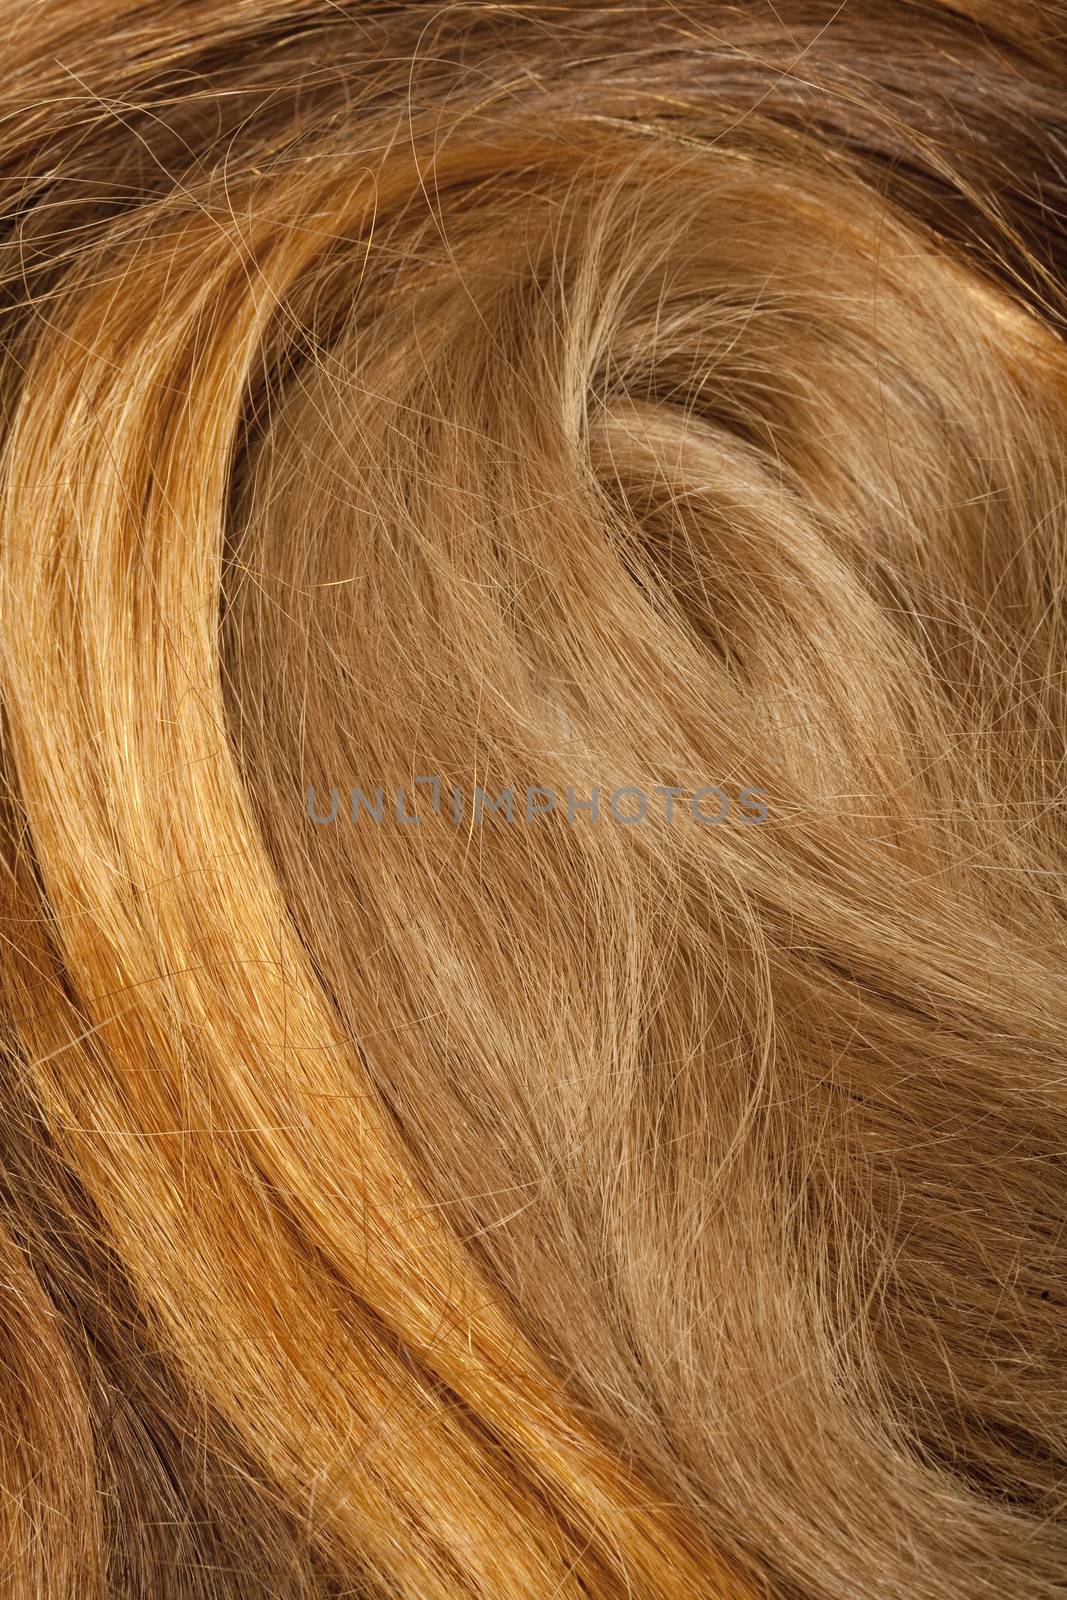 Real Human Hair Used for Production of Wigs